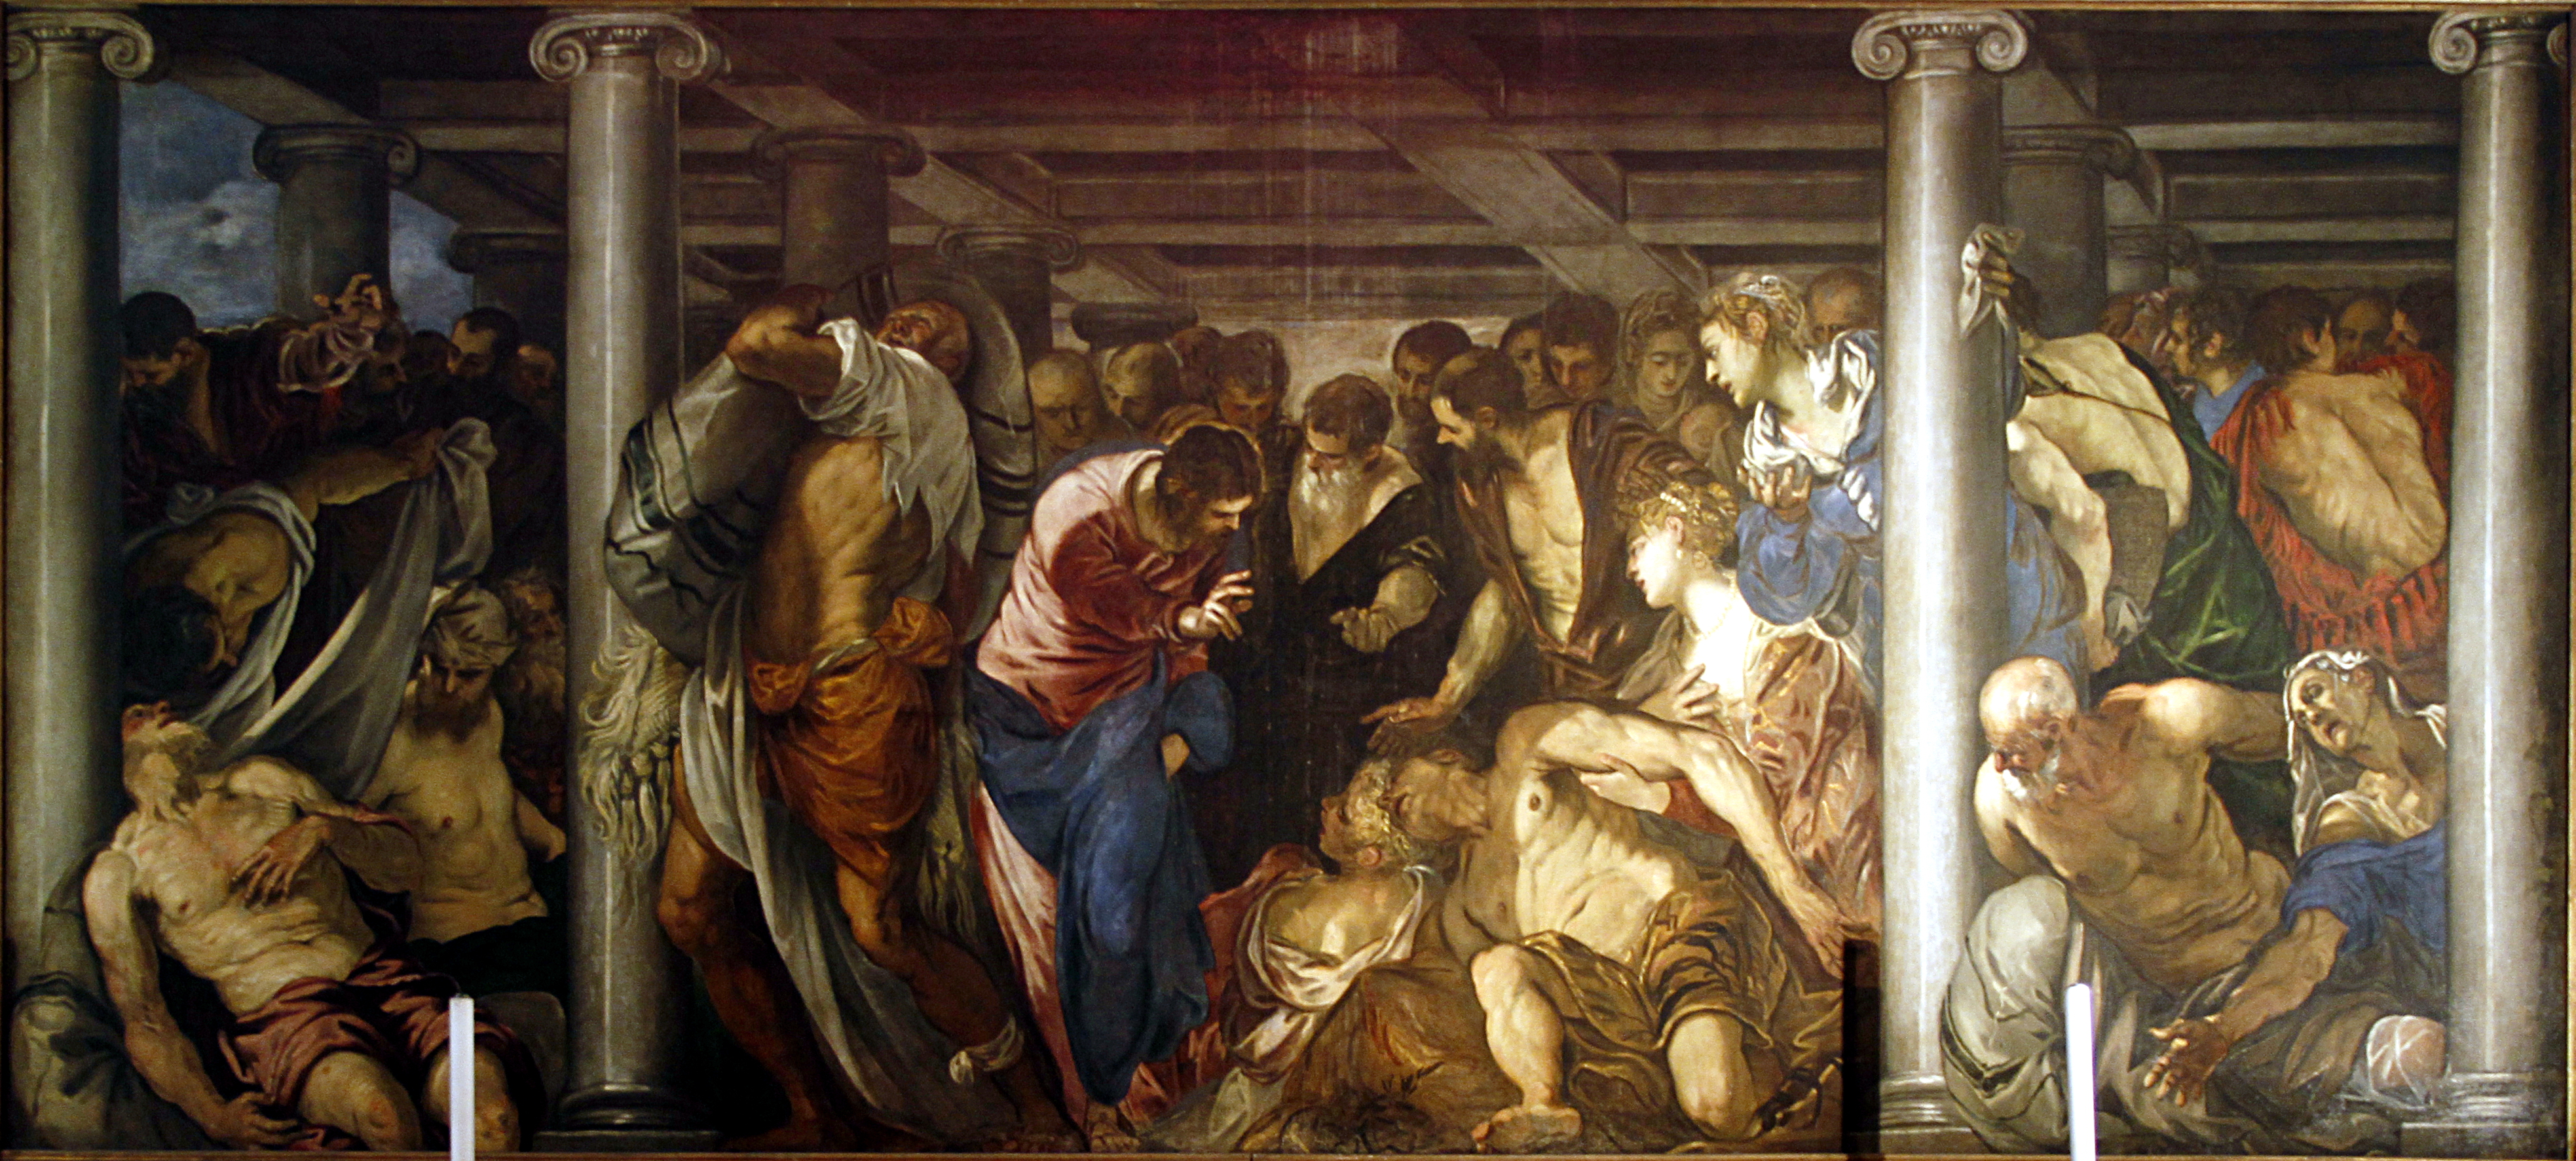 San Rocco - Jacopo Tintoretto - The healing of the paralytic